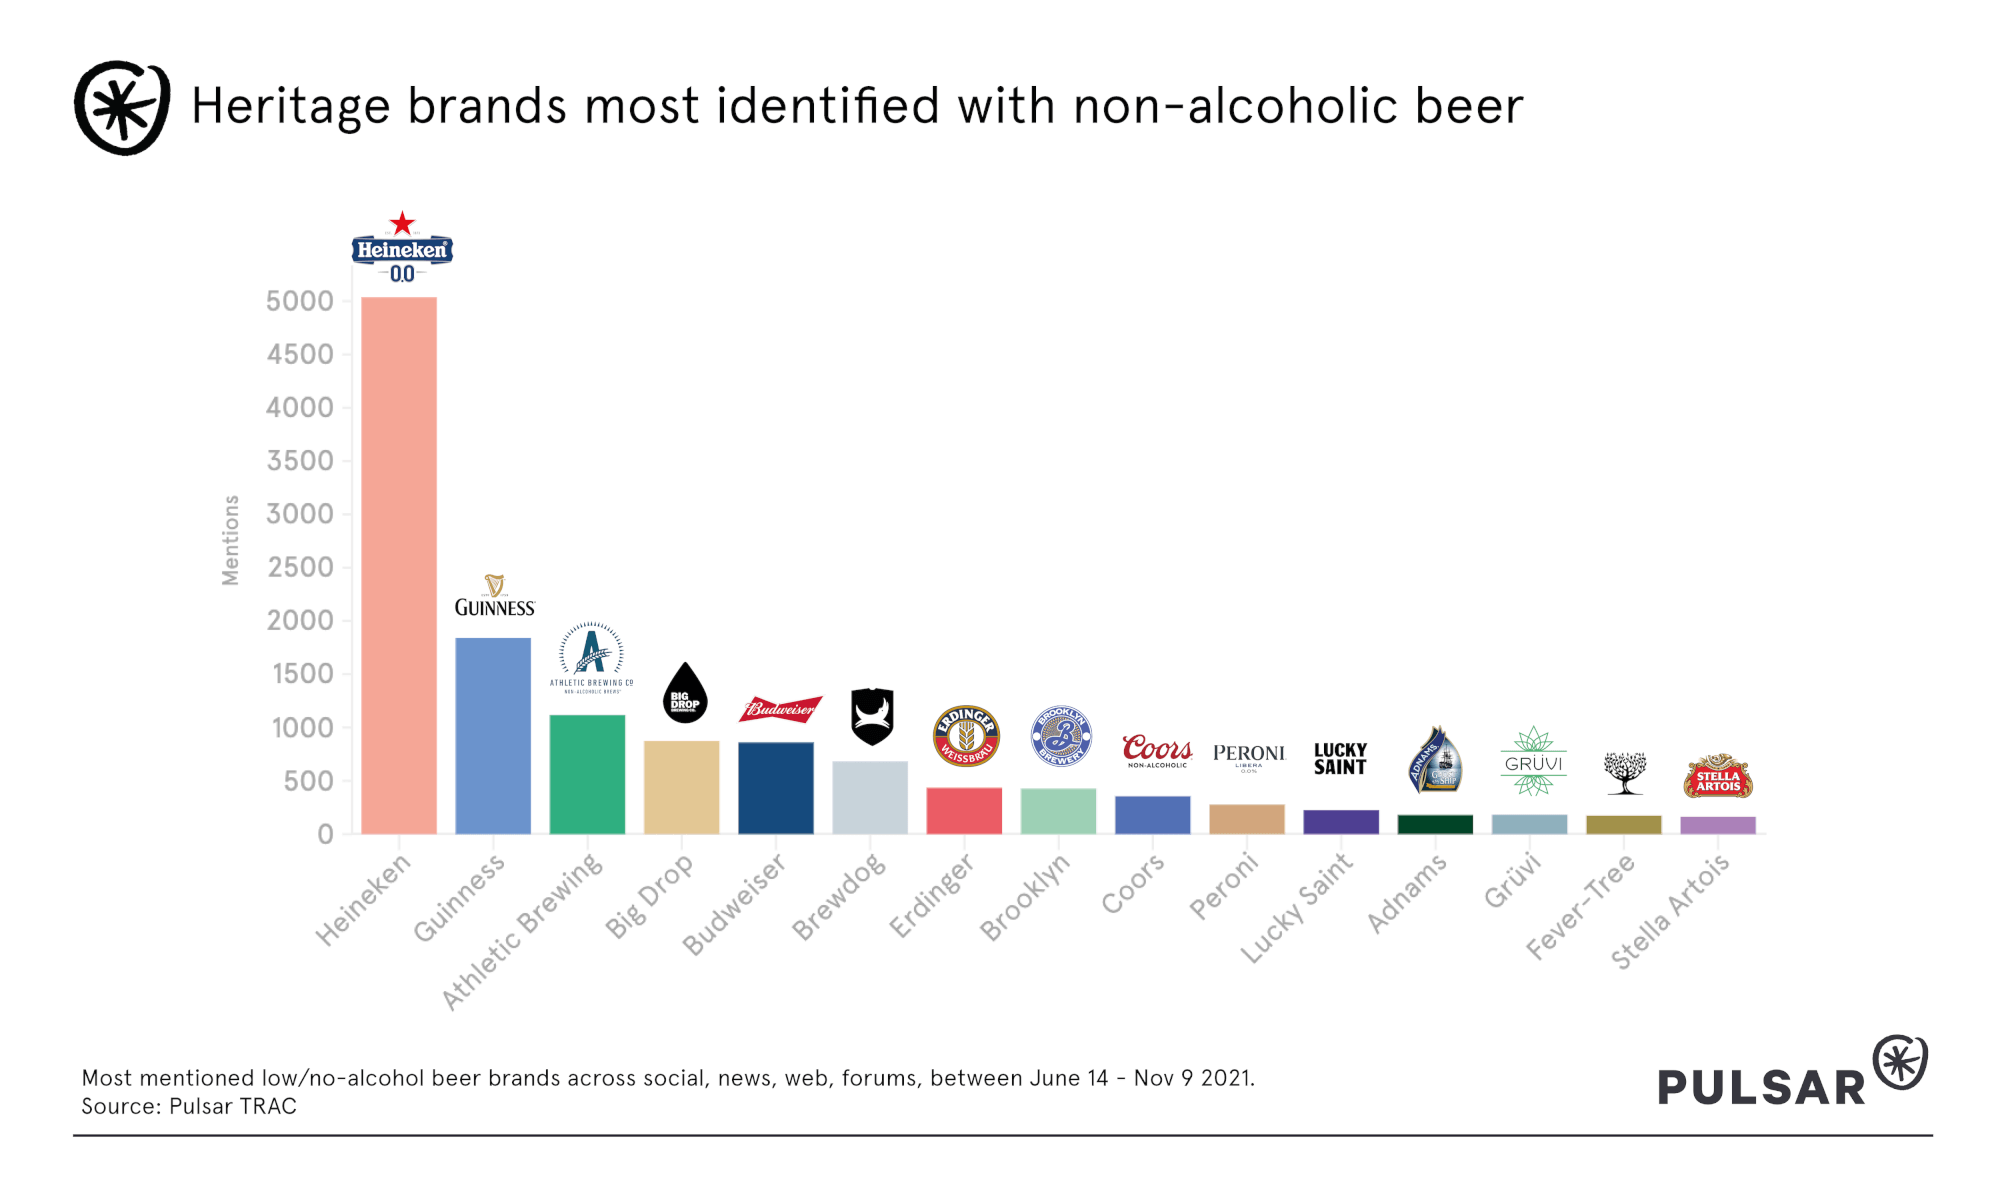 Heritage brands most identified with non-alcoholic beer